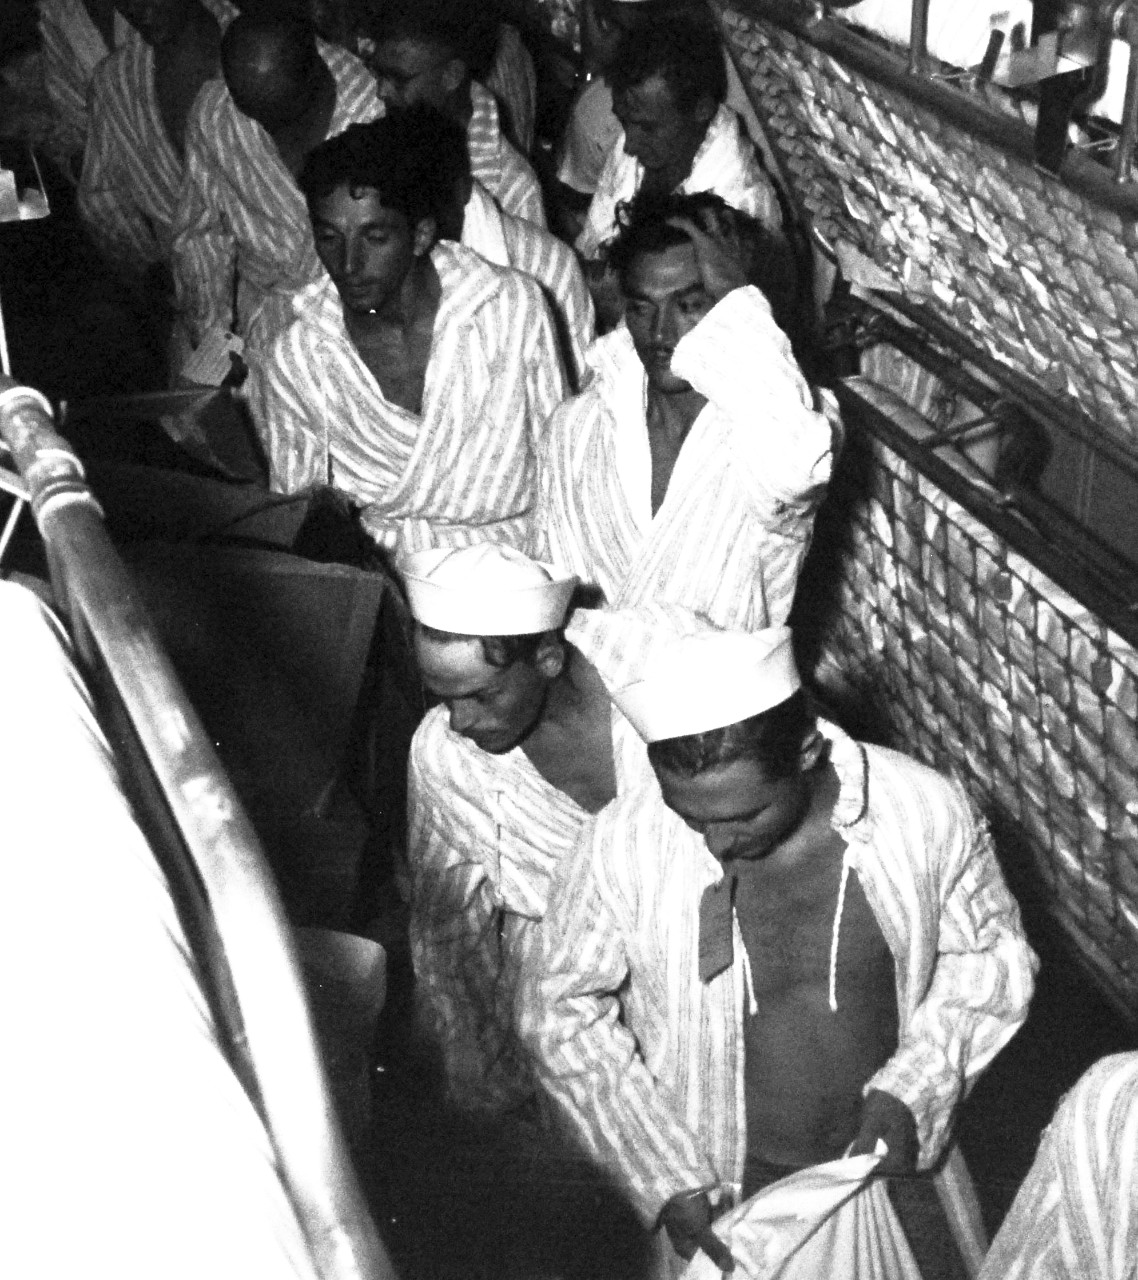 80-G-490453:  Allied Prisoners of War, 1945.   U.S.  Prisoners of War after their rescue from prison camps in the Tokyo area being cared for on board USS Benevolence (AH-13).  Rescued prisoners are given clothing, August 30, 1945.  Official U.S. Navy photograph, now in the collections of the National Archives.  (2014/05/29).    The original is a small photograph.   